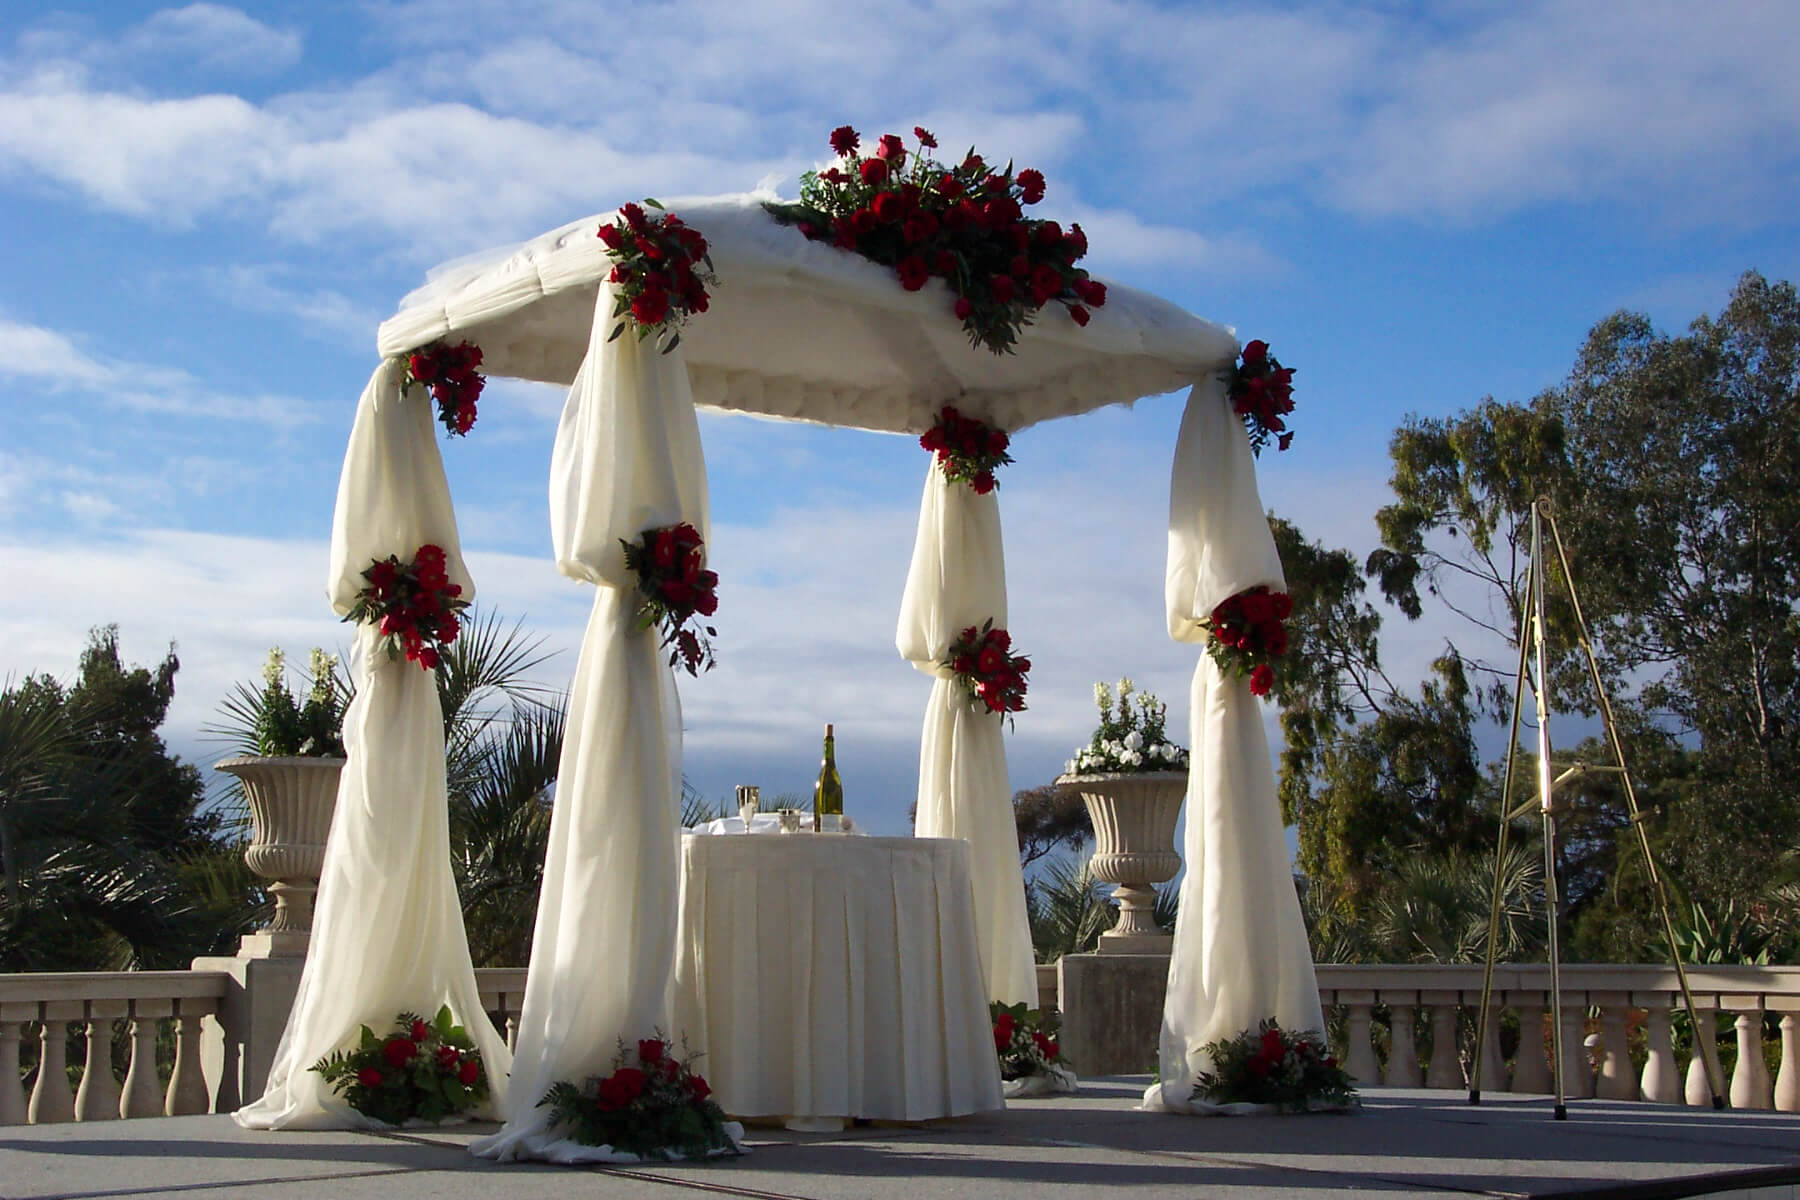 A chuppah, also known as a Jewish wedding canopy.